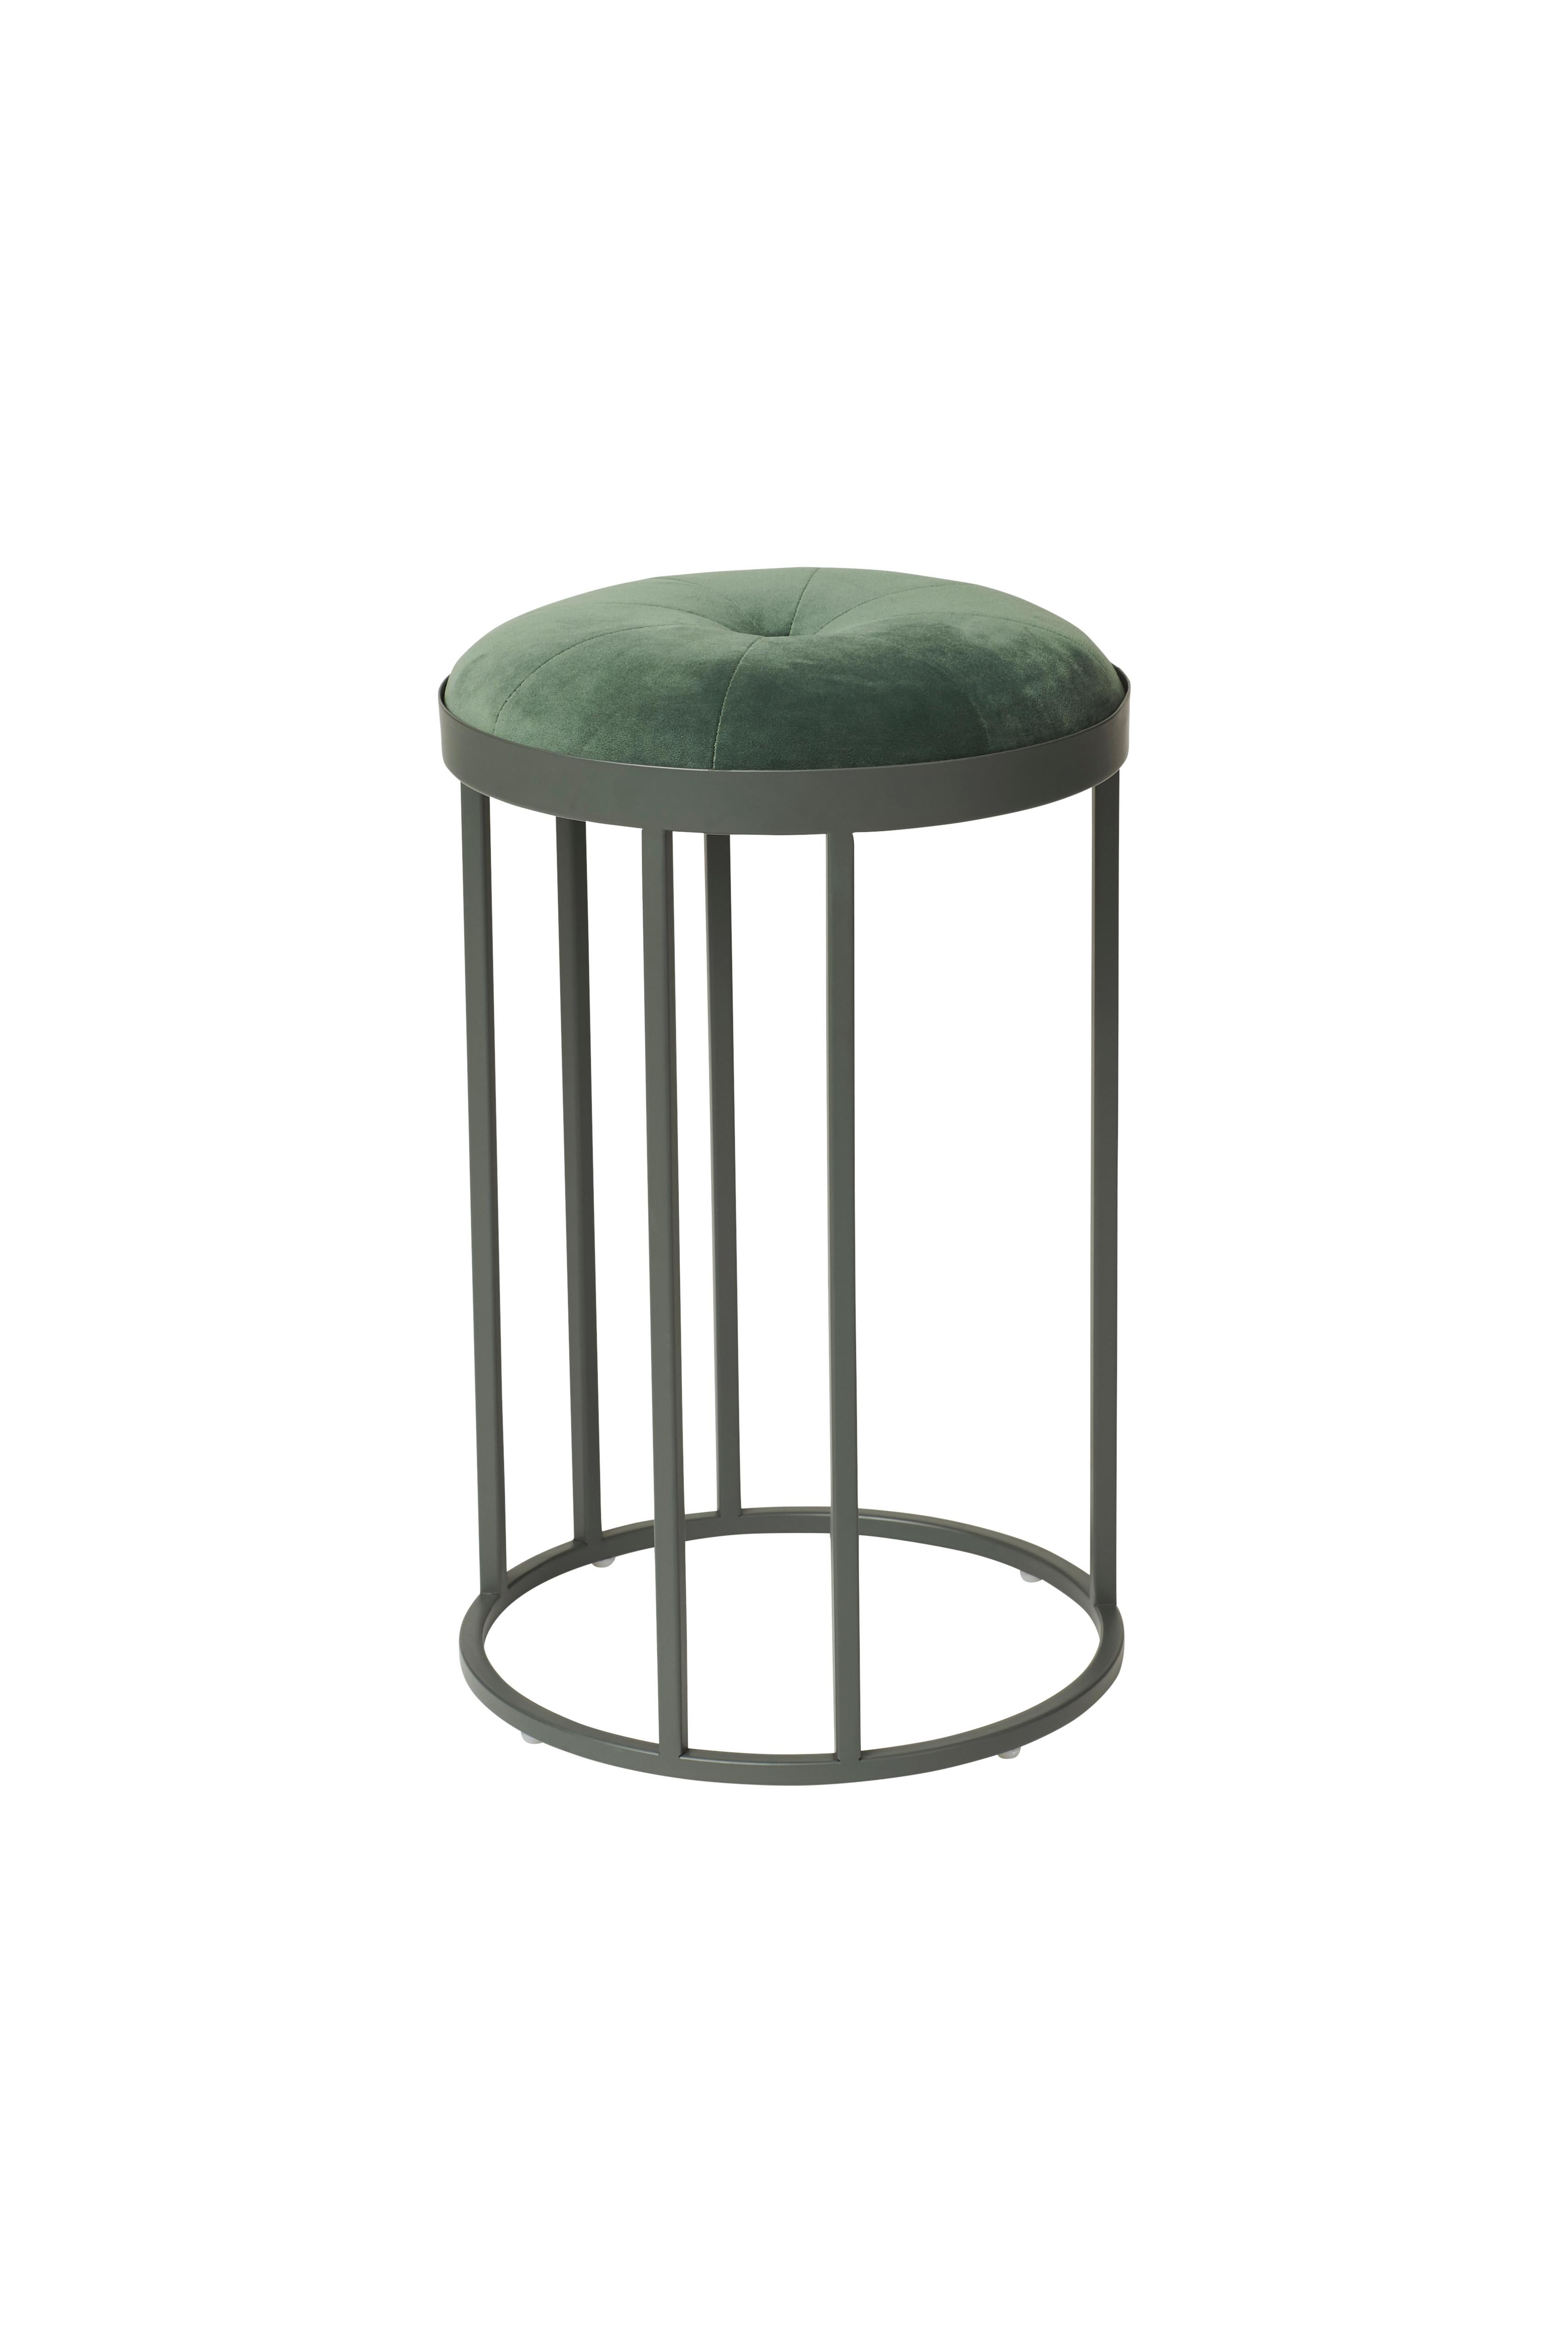 For Sale: Green (Forest green) Daisy Stool, by Sabine Stougaard from Warm Nordic